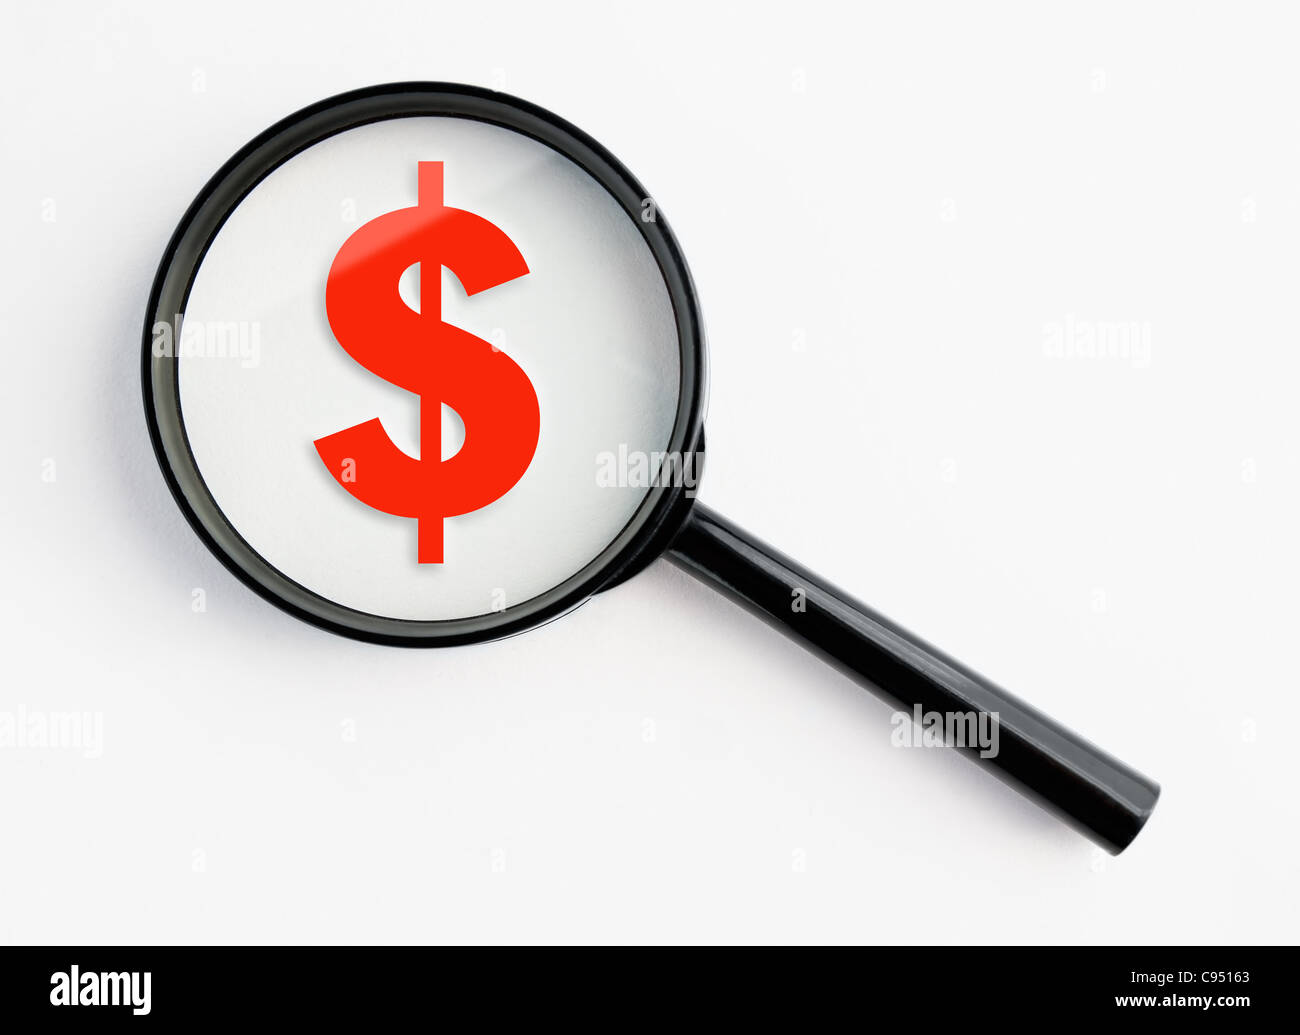 dollar symbol under a magnifying glass, with isolated background Stock Photo